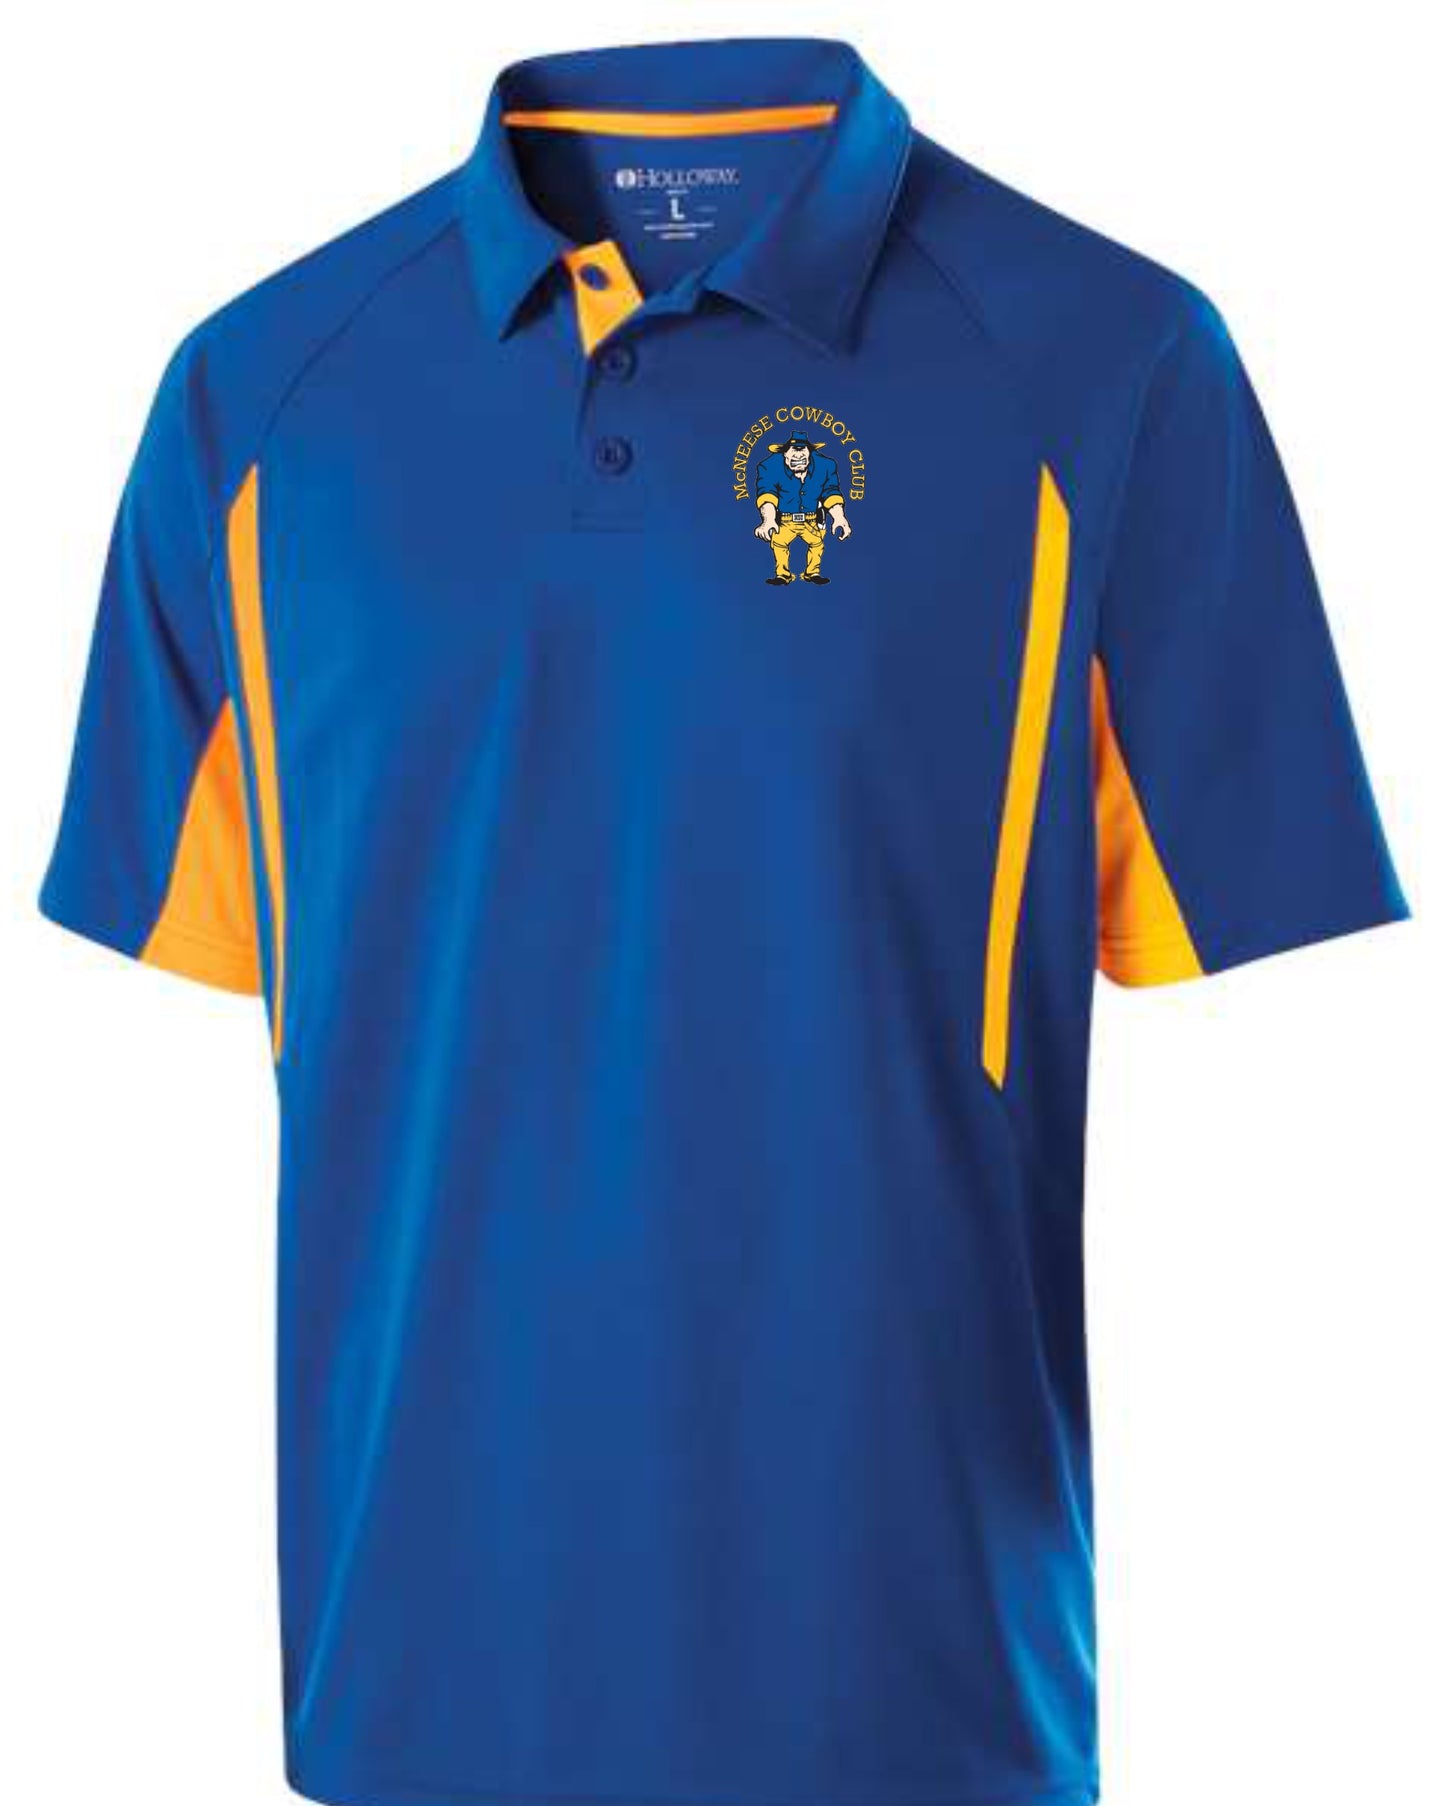 # Custom Product for the McNeese Cowboy Club